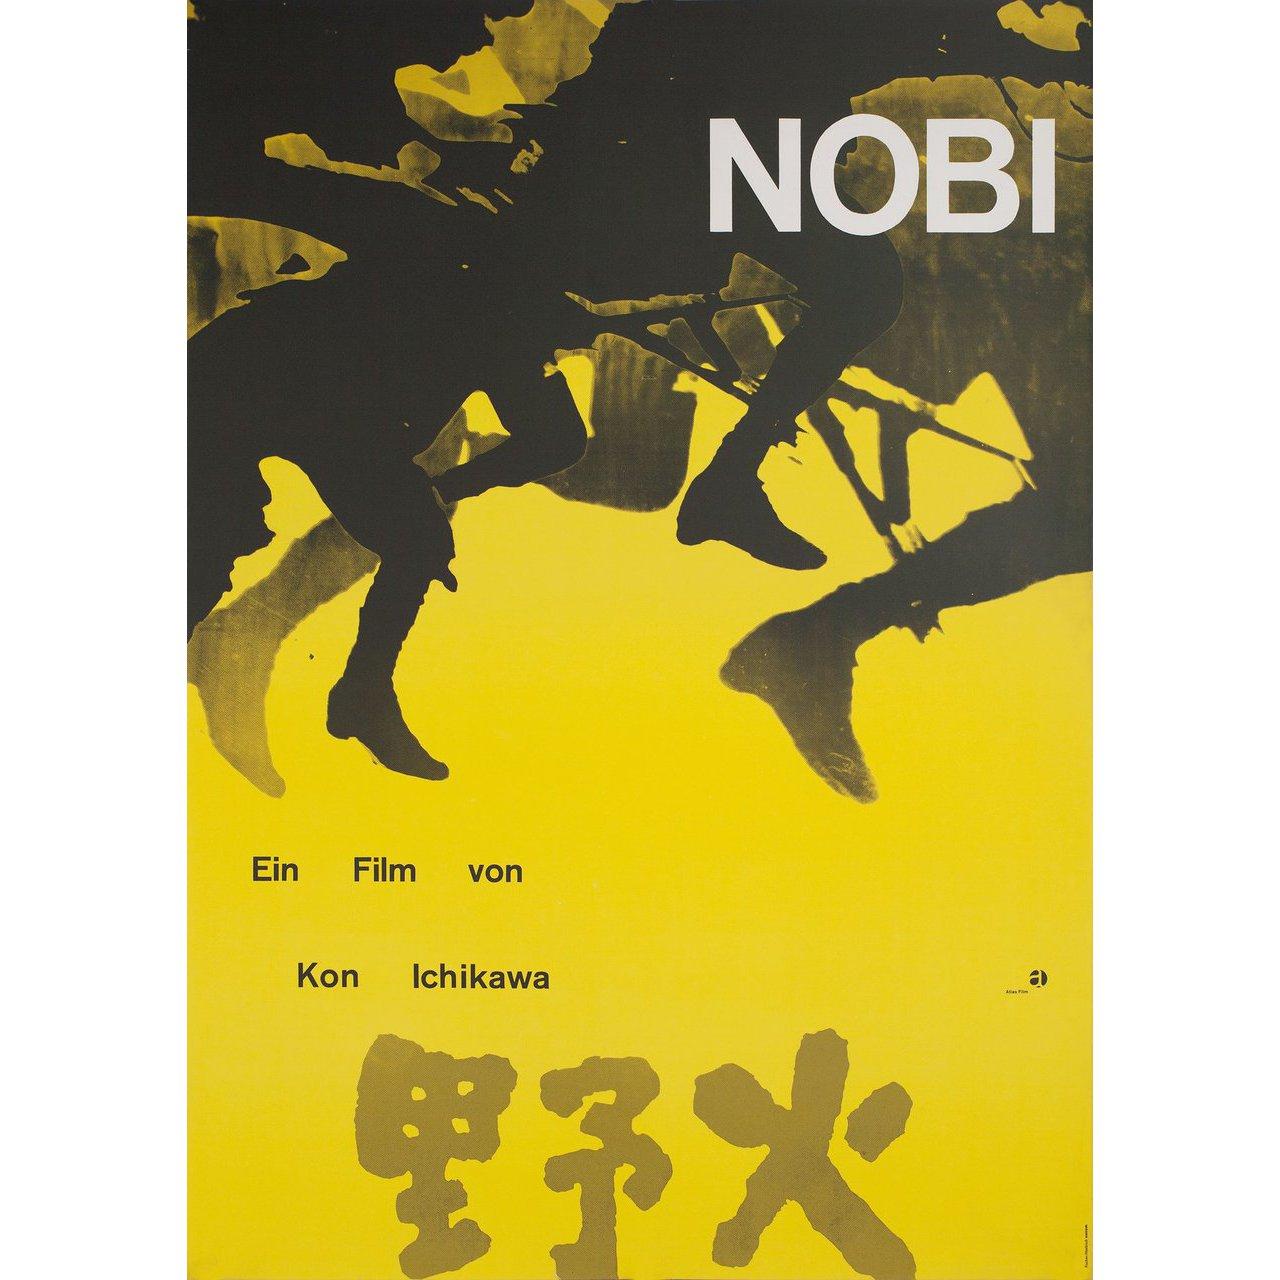 Original 1961 German A1 poster by Dorothea Fischer-Nosbisch for the film Fires on the Plain (Nobi) directed by Kon Ichikawa with Eiji Funakoshi / Osamu Takizawa / Mickey Curtis / Mantaro Ushio. Fine condition, rolled. Please note: the size is stated